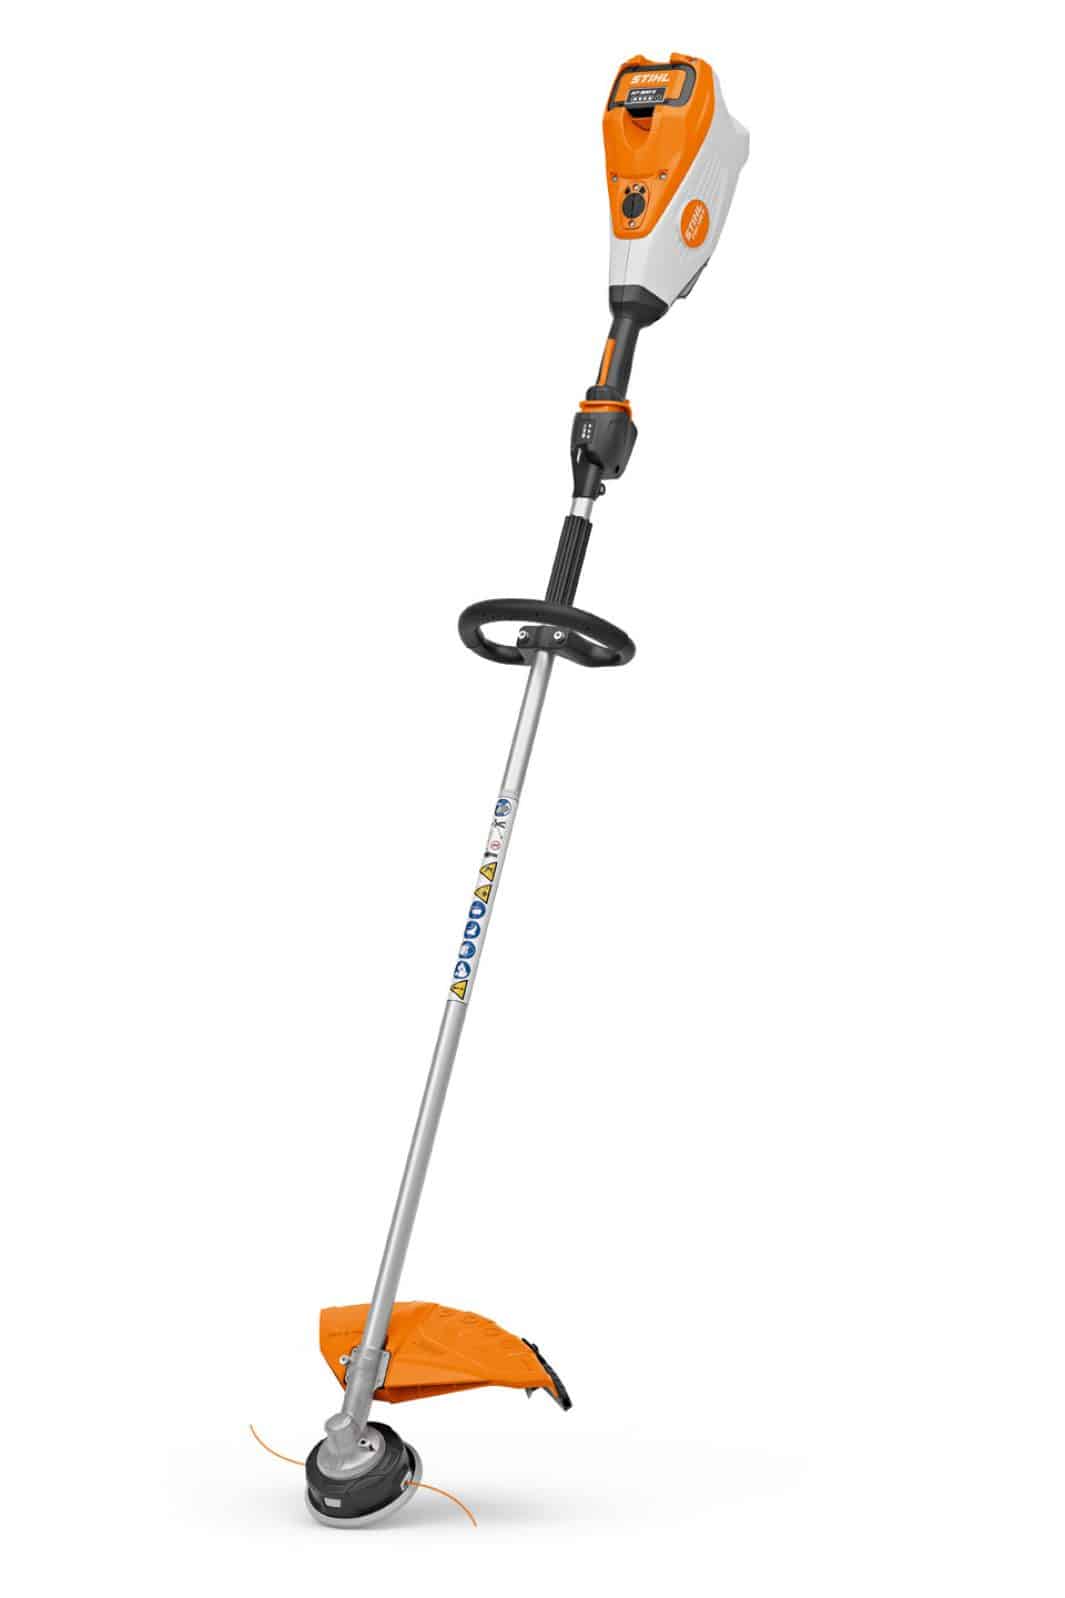 Stihl FSA135 R Cordless Brushcutter with loop handle